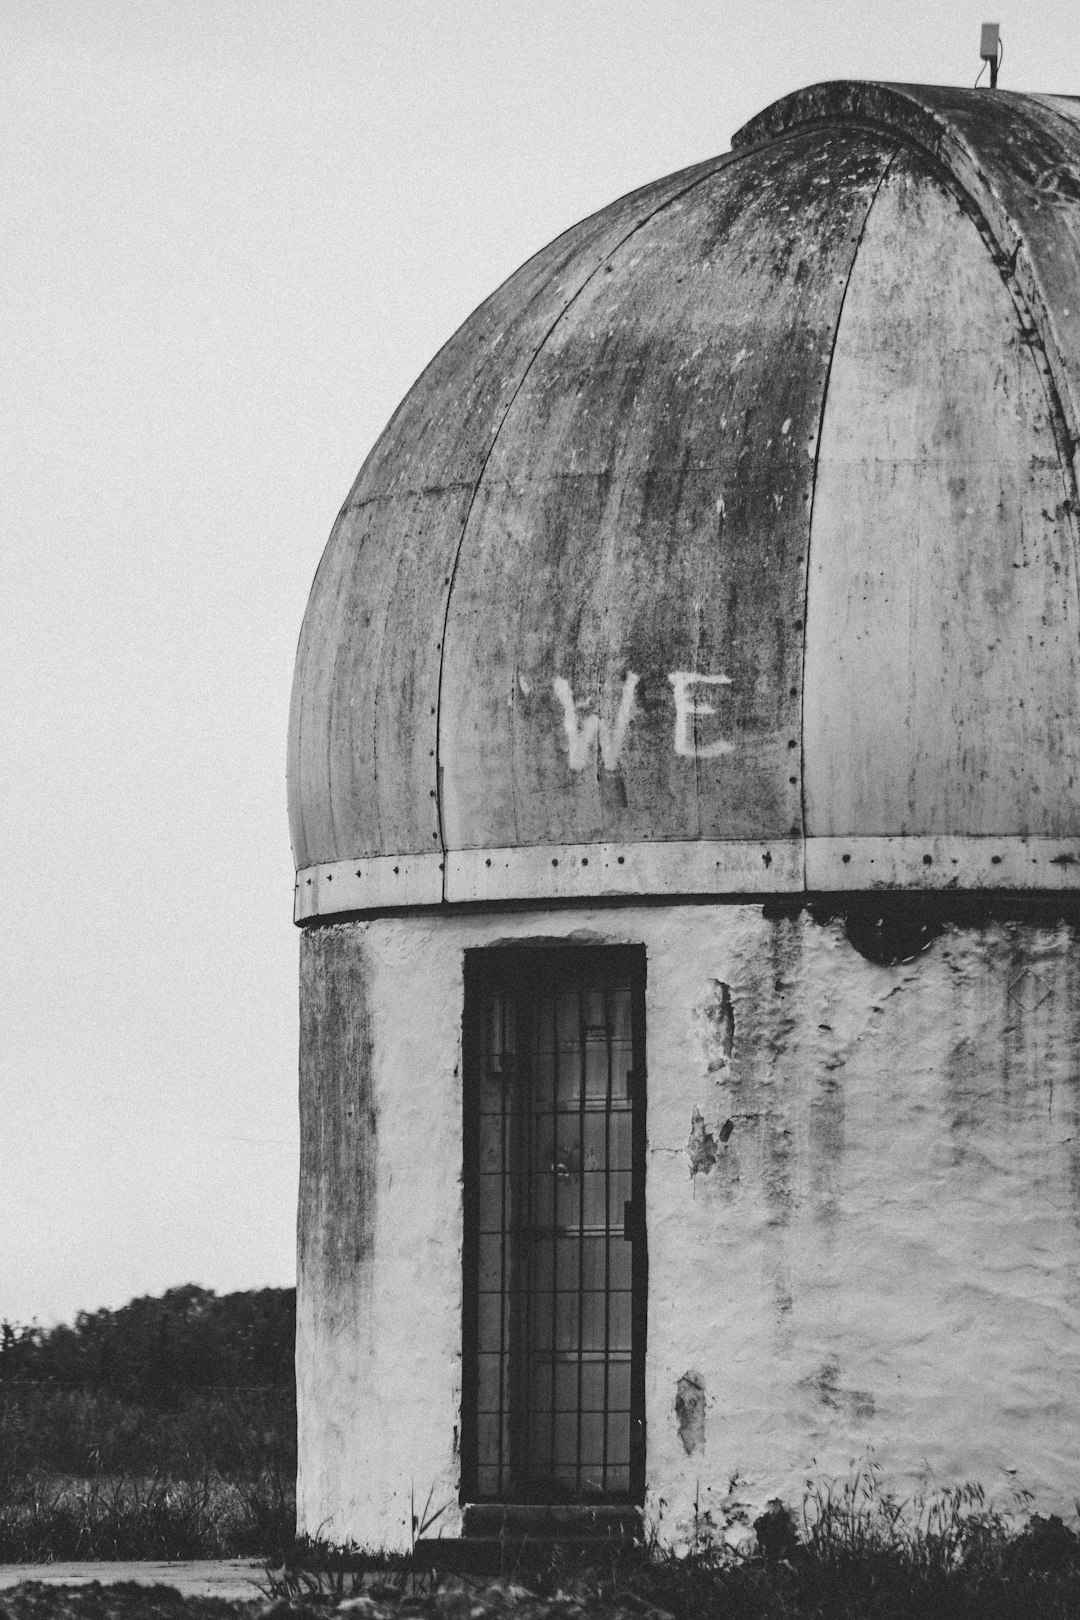 grayscale photo of dome building